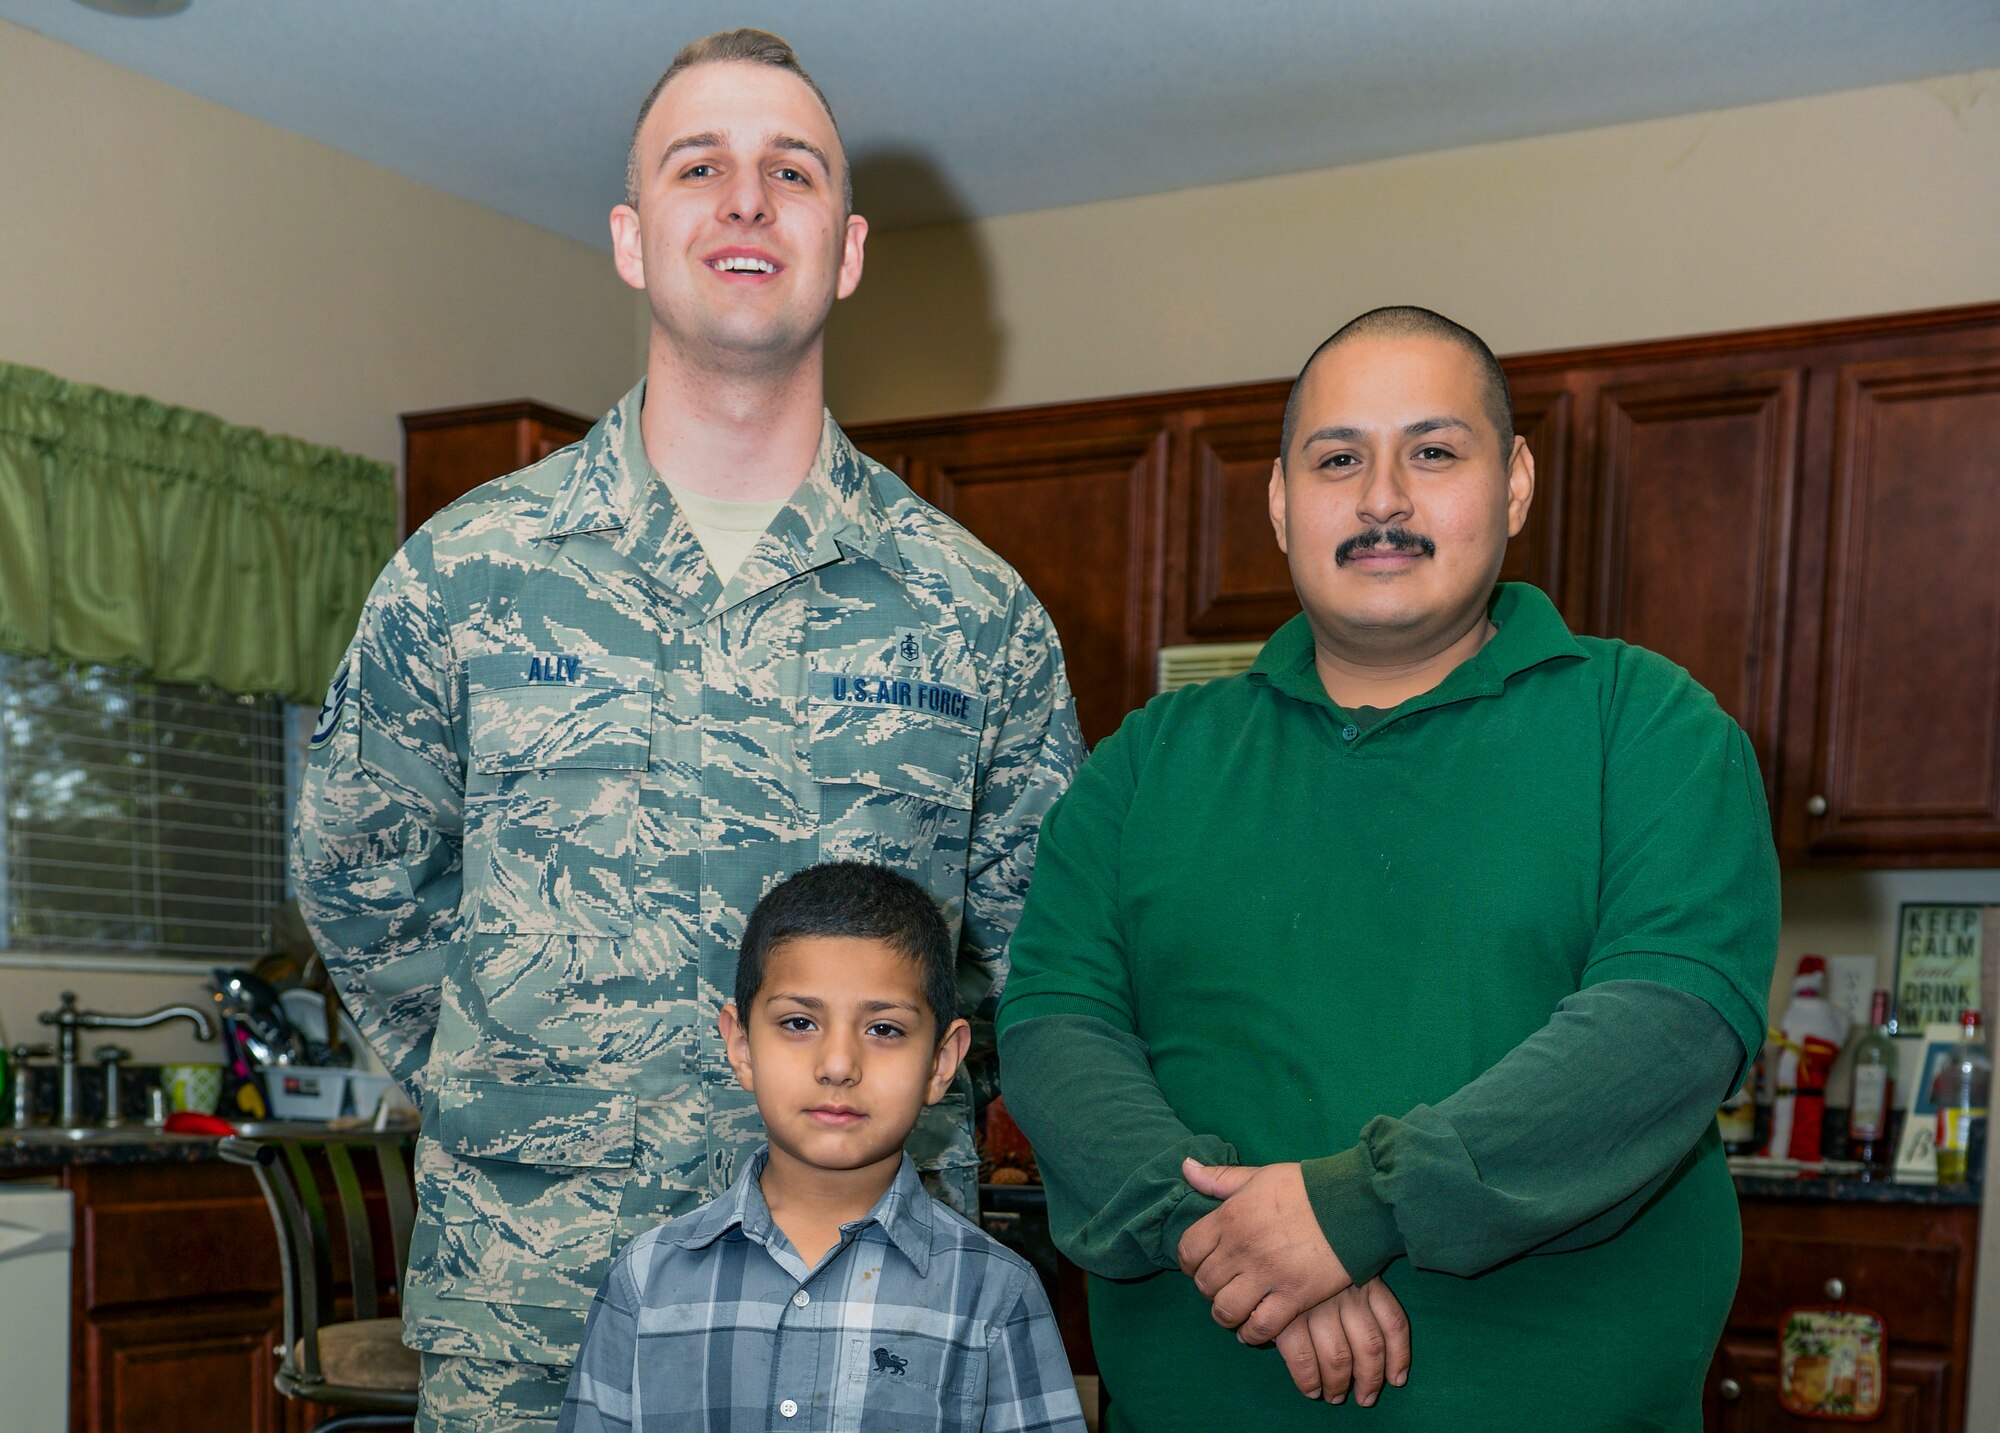 Staff Sgt. Jeffry Ally, 99th Medical Group surgical technician, right, Juan Sanjuan, Ally’s neighbor, and his son, Chava, pose for a photo in Las Vegas, Nev., April 4, 2017. Ally saved the child’s life when Sanjuan ran to him for help. His trauma and CPR experience allowed him to properly expel food that was obstructing the child’s airways. (U.S. Air Force photo by Airman 1st Class Andrew Sarver/Released)